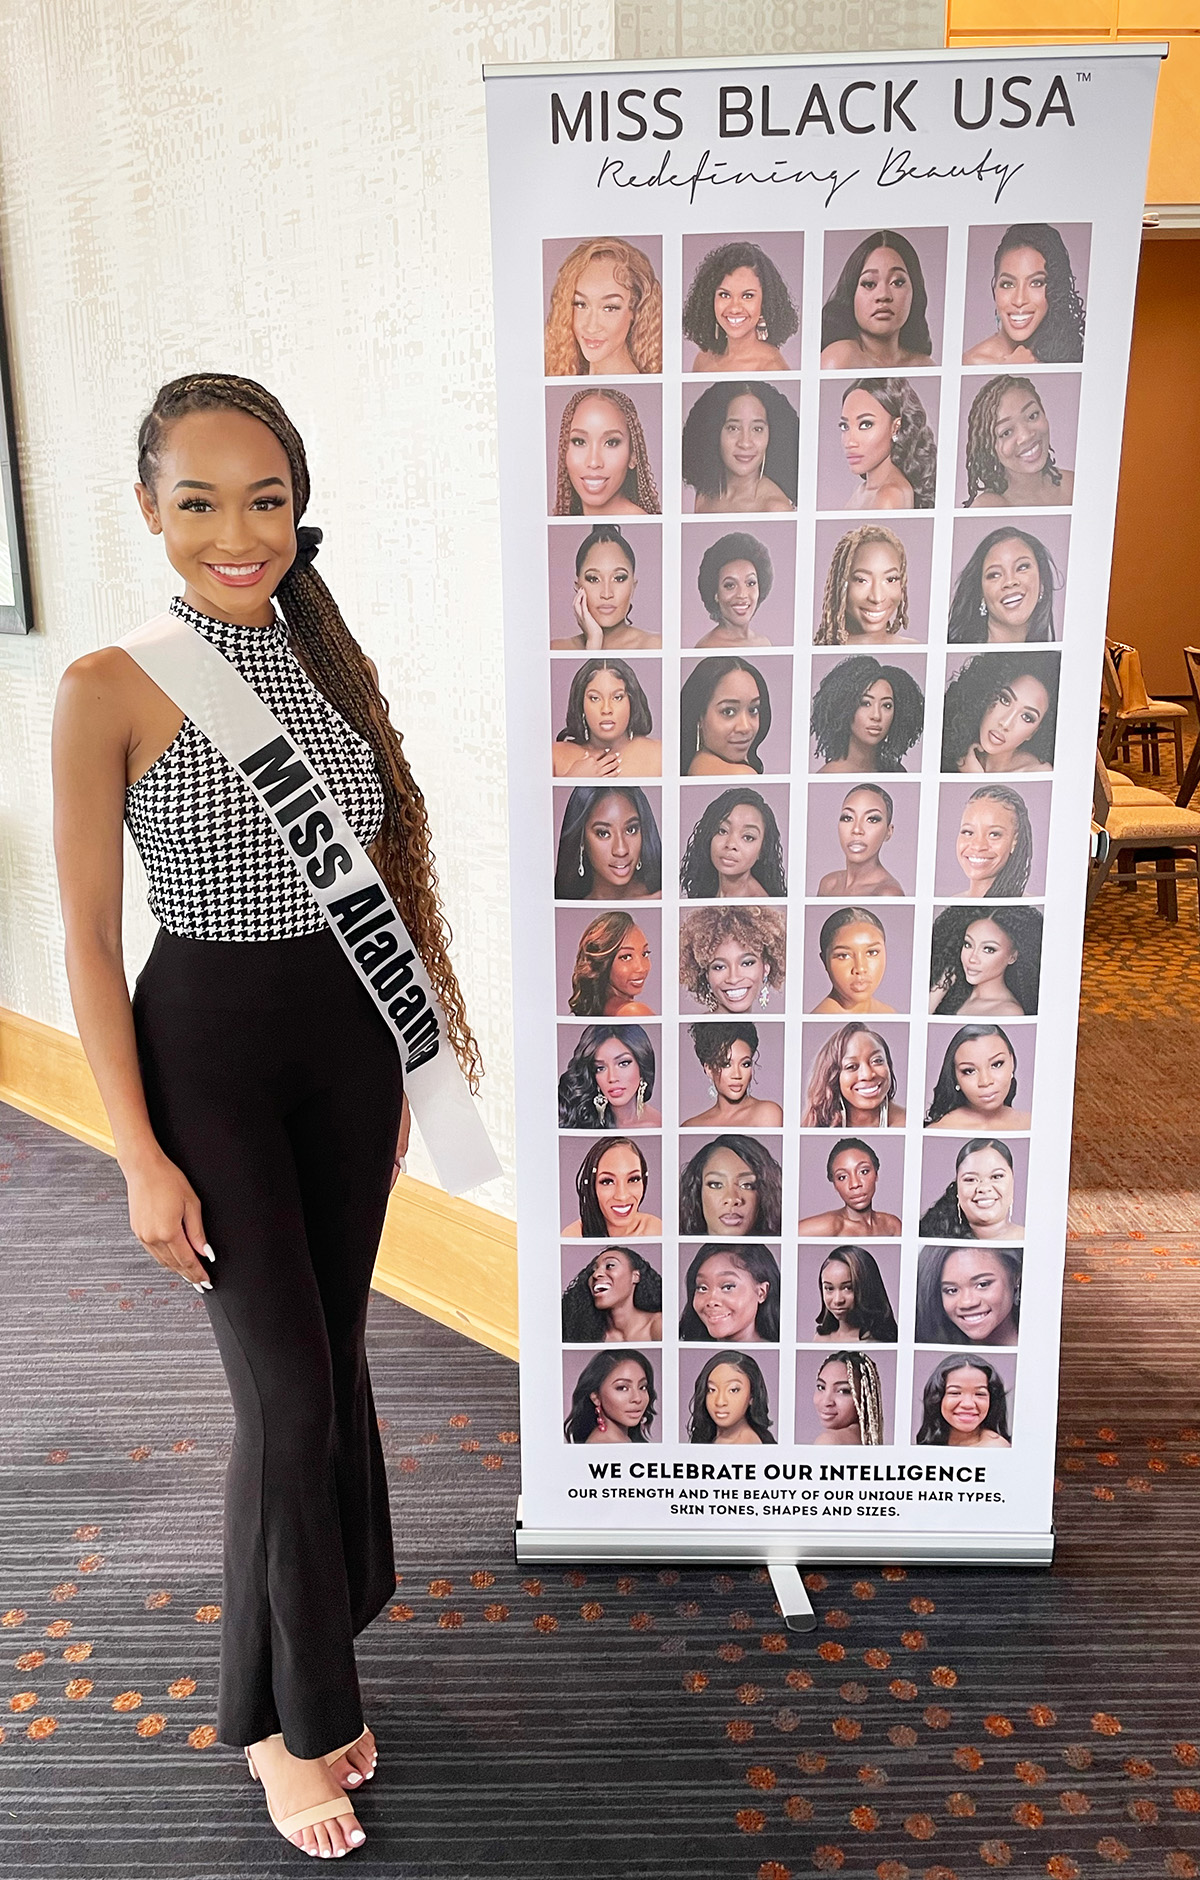 Taite in Washington, DC pictured alongside other Miss Black USA participants.